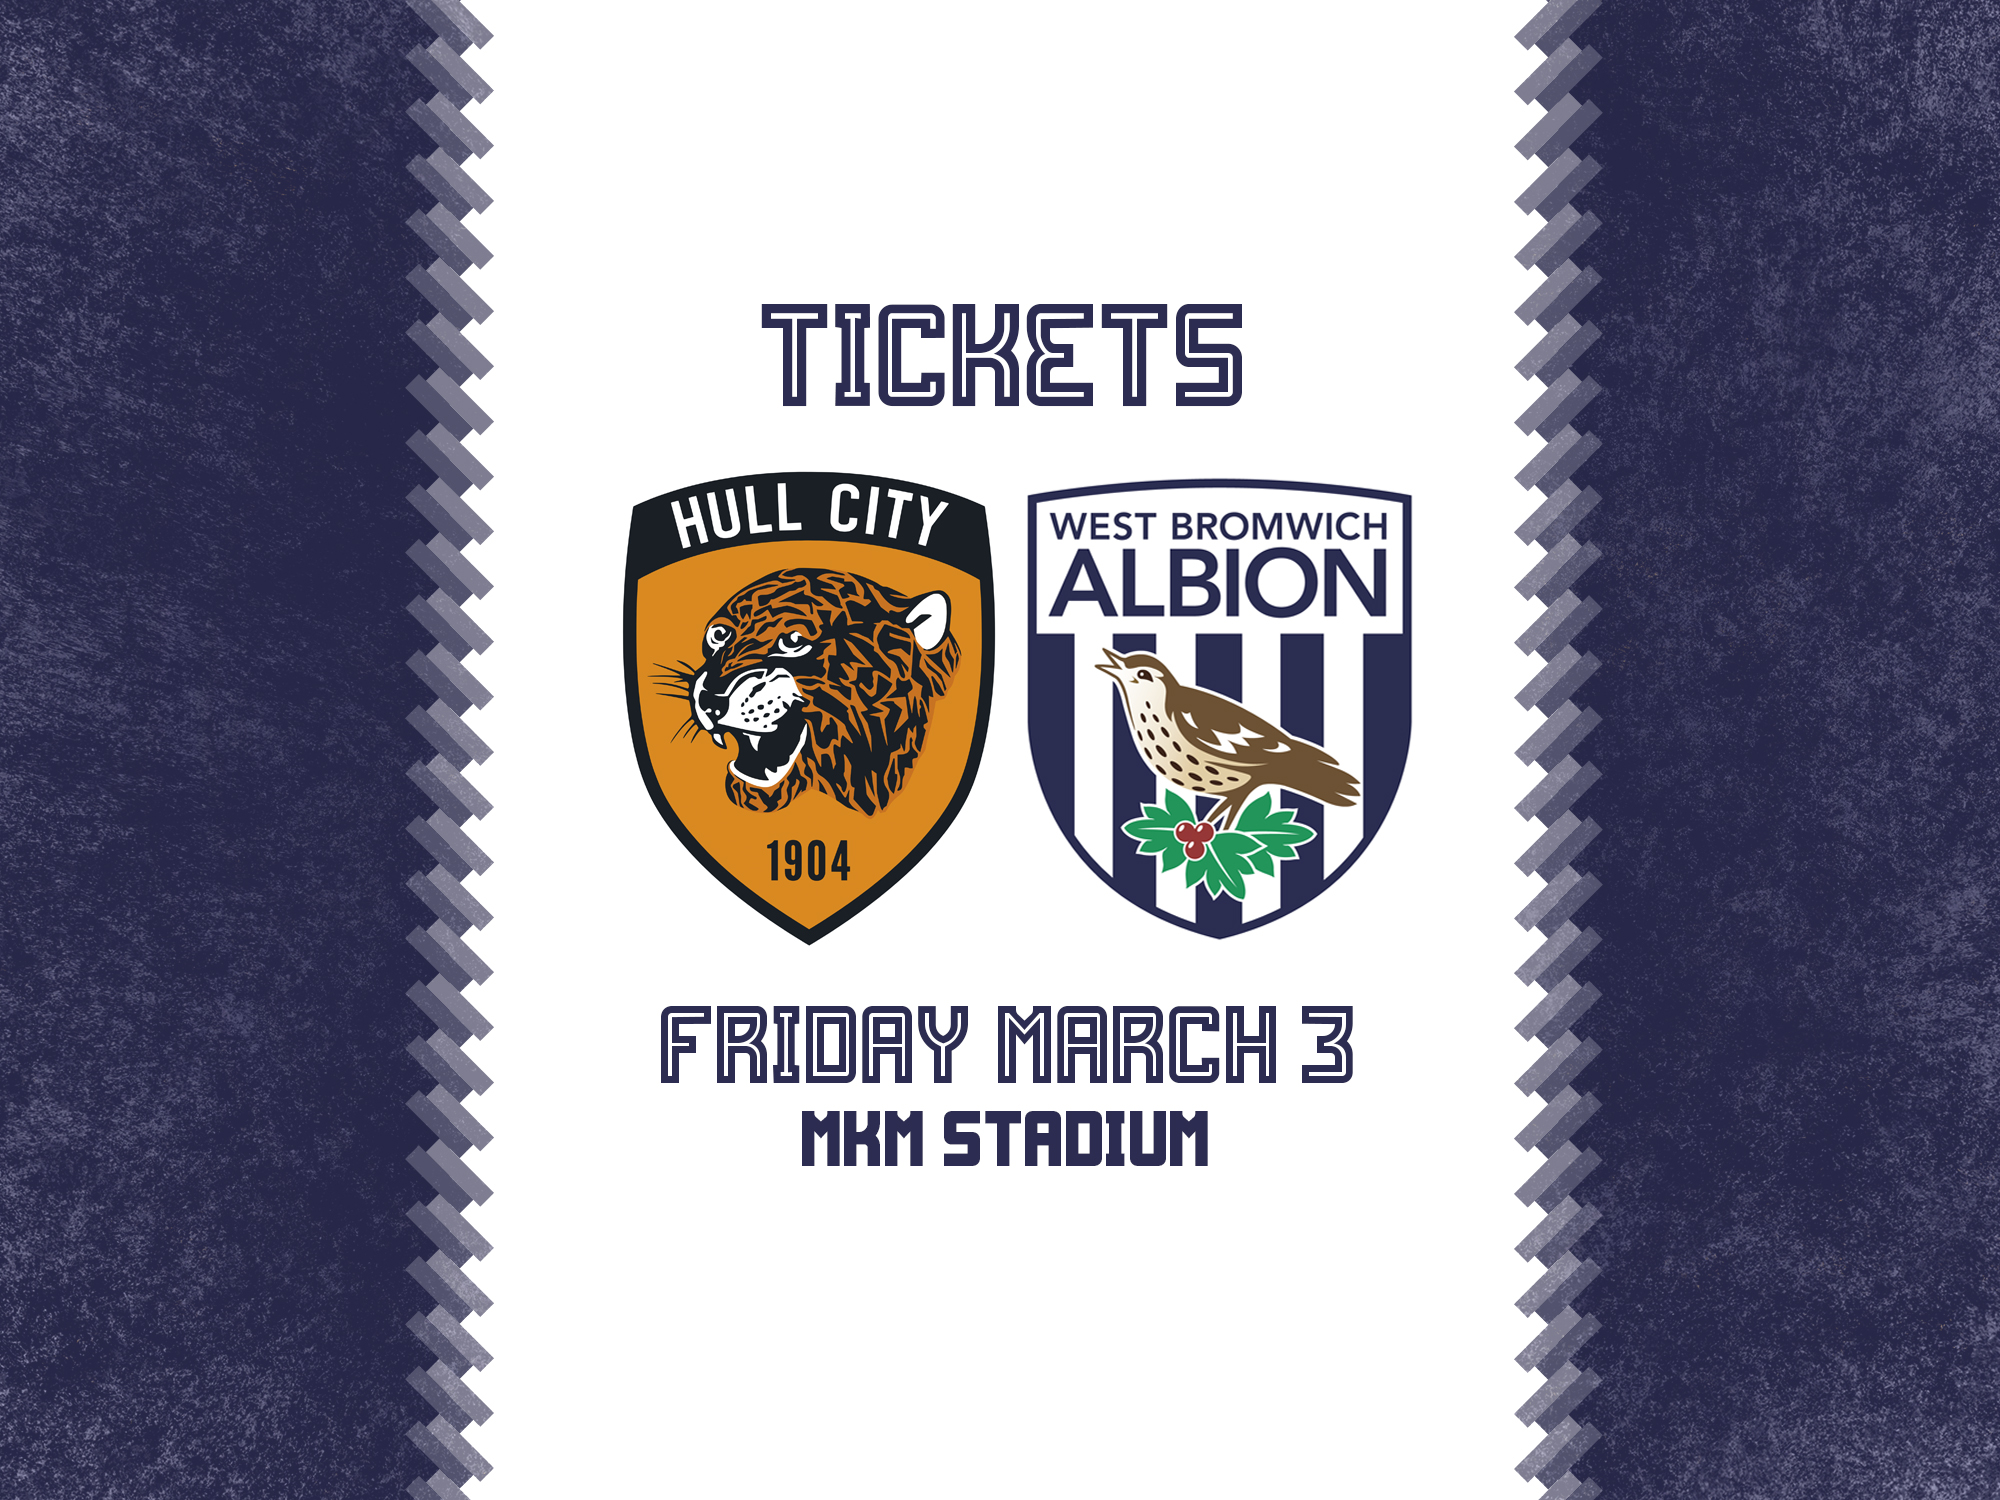 A ticket graphic for Albion's trip to Hull City